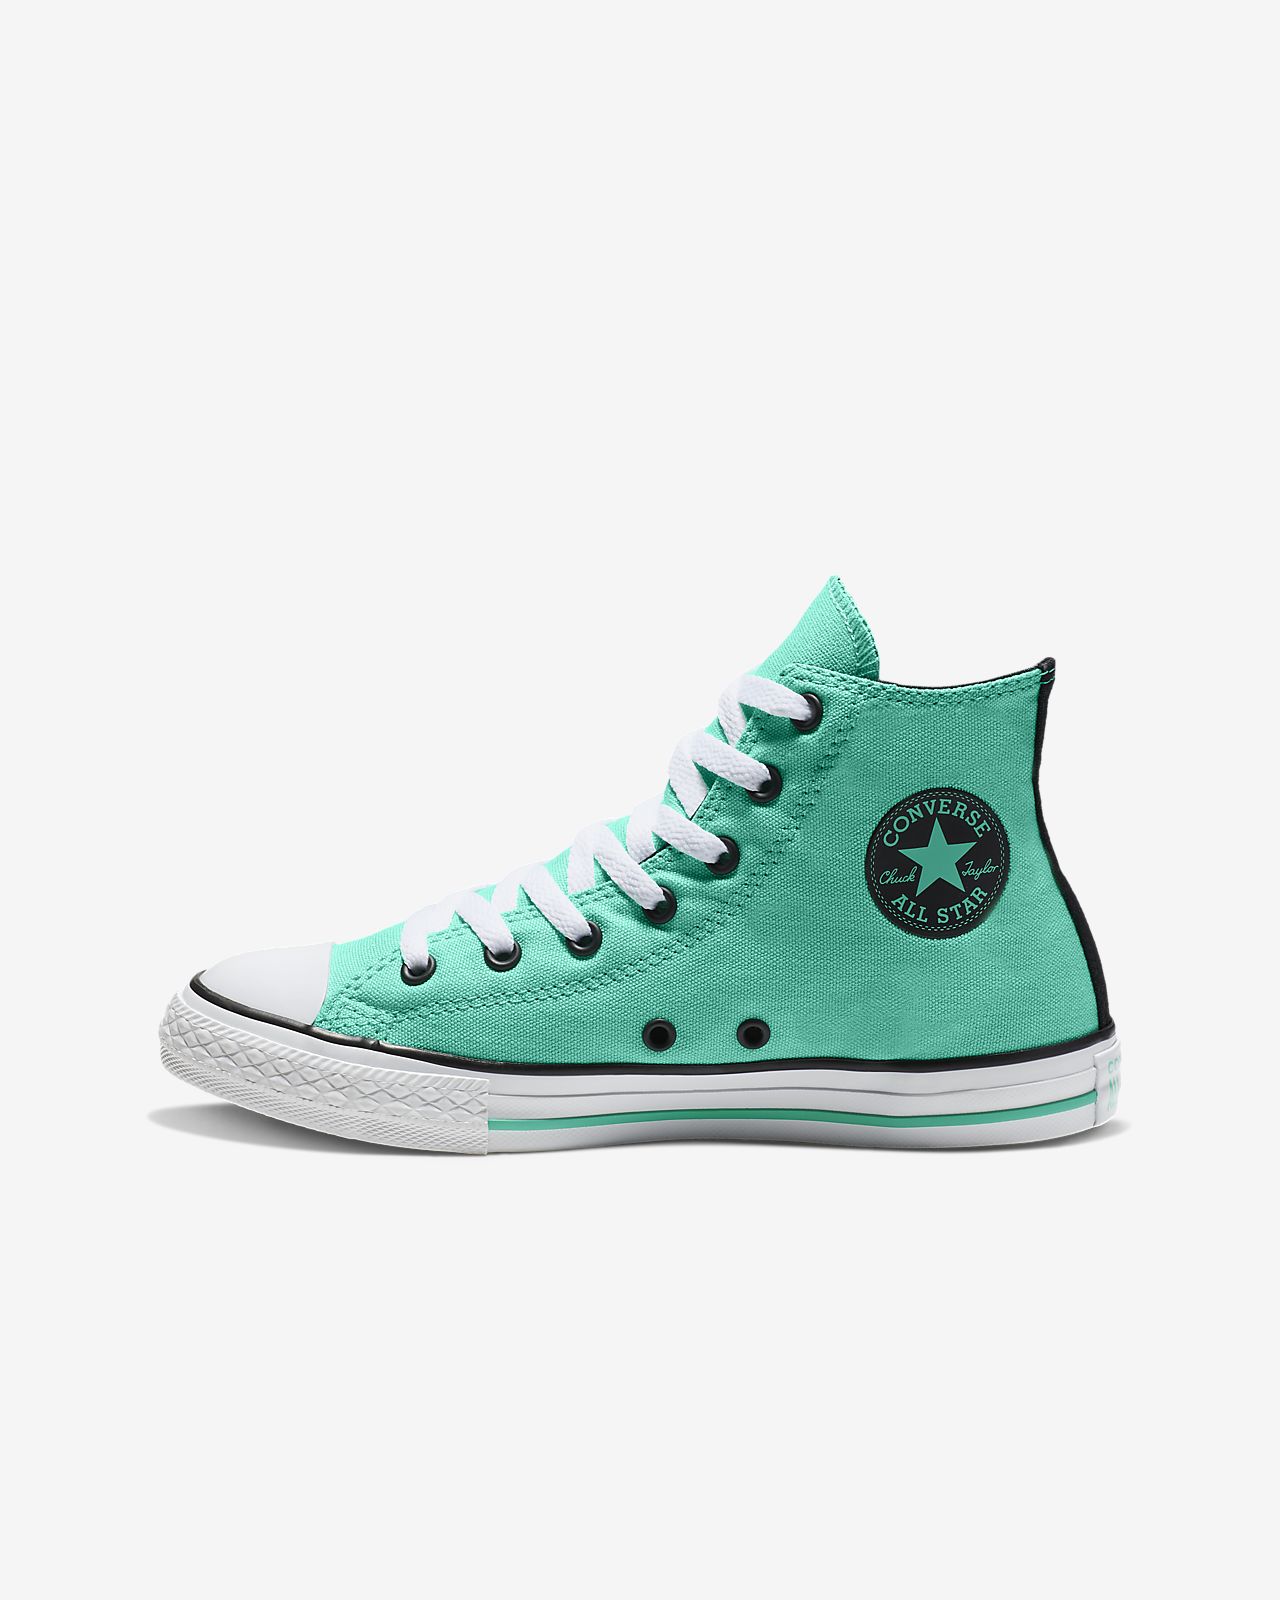 converse turquoise high tops